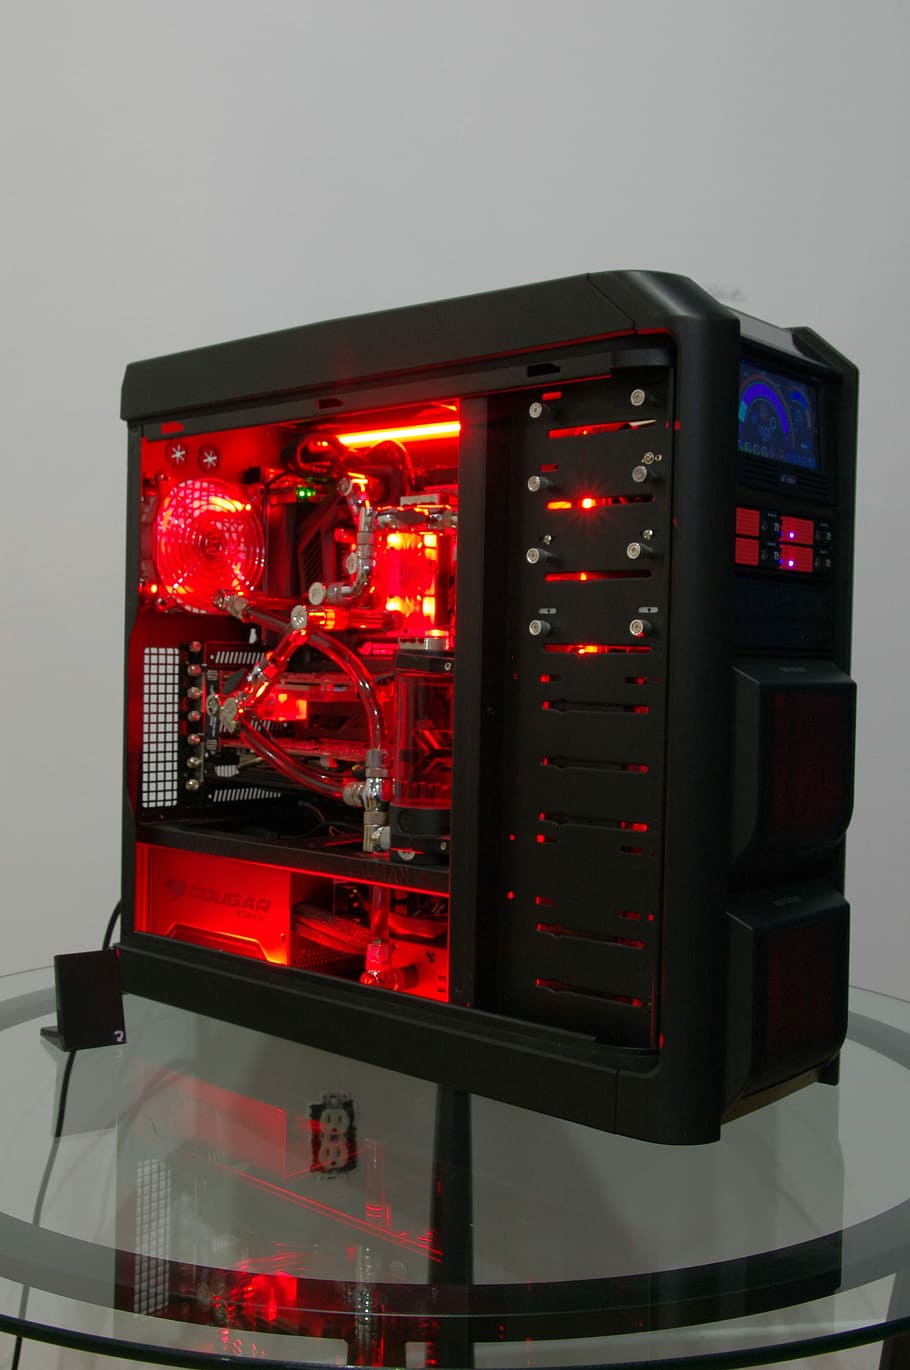 Computer, Watercooled, Gaming, red, industry, indoors, illuminated, technology, equipment, communication